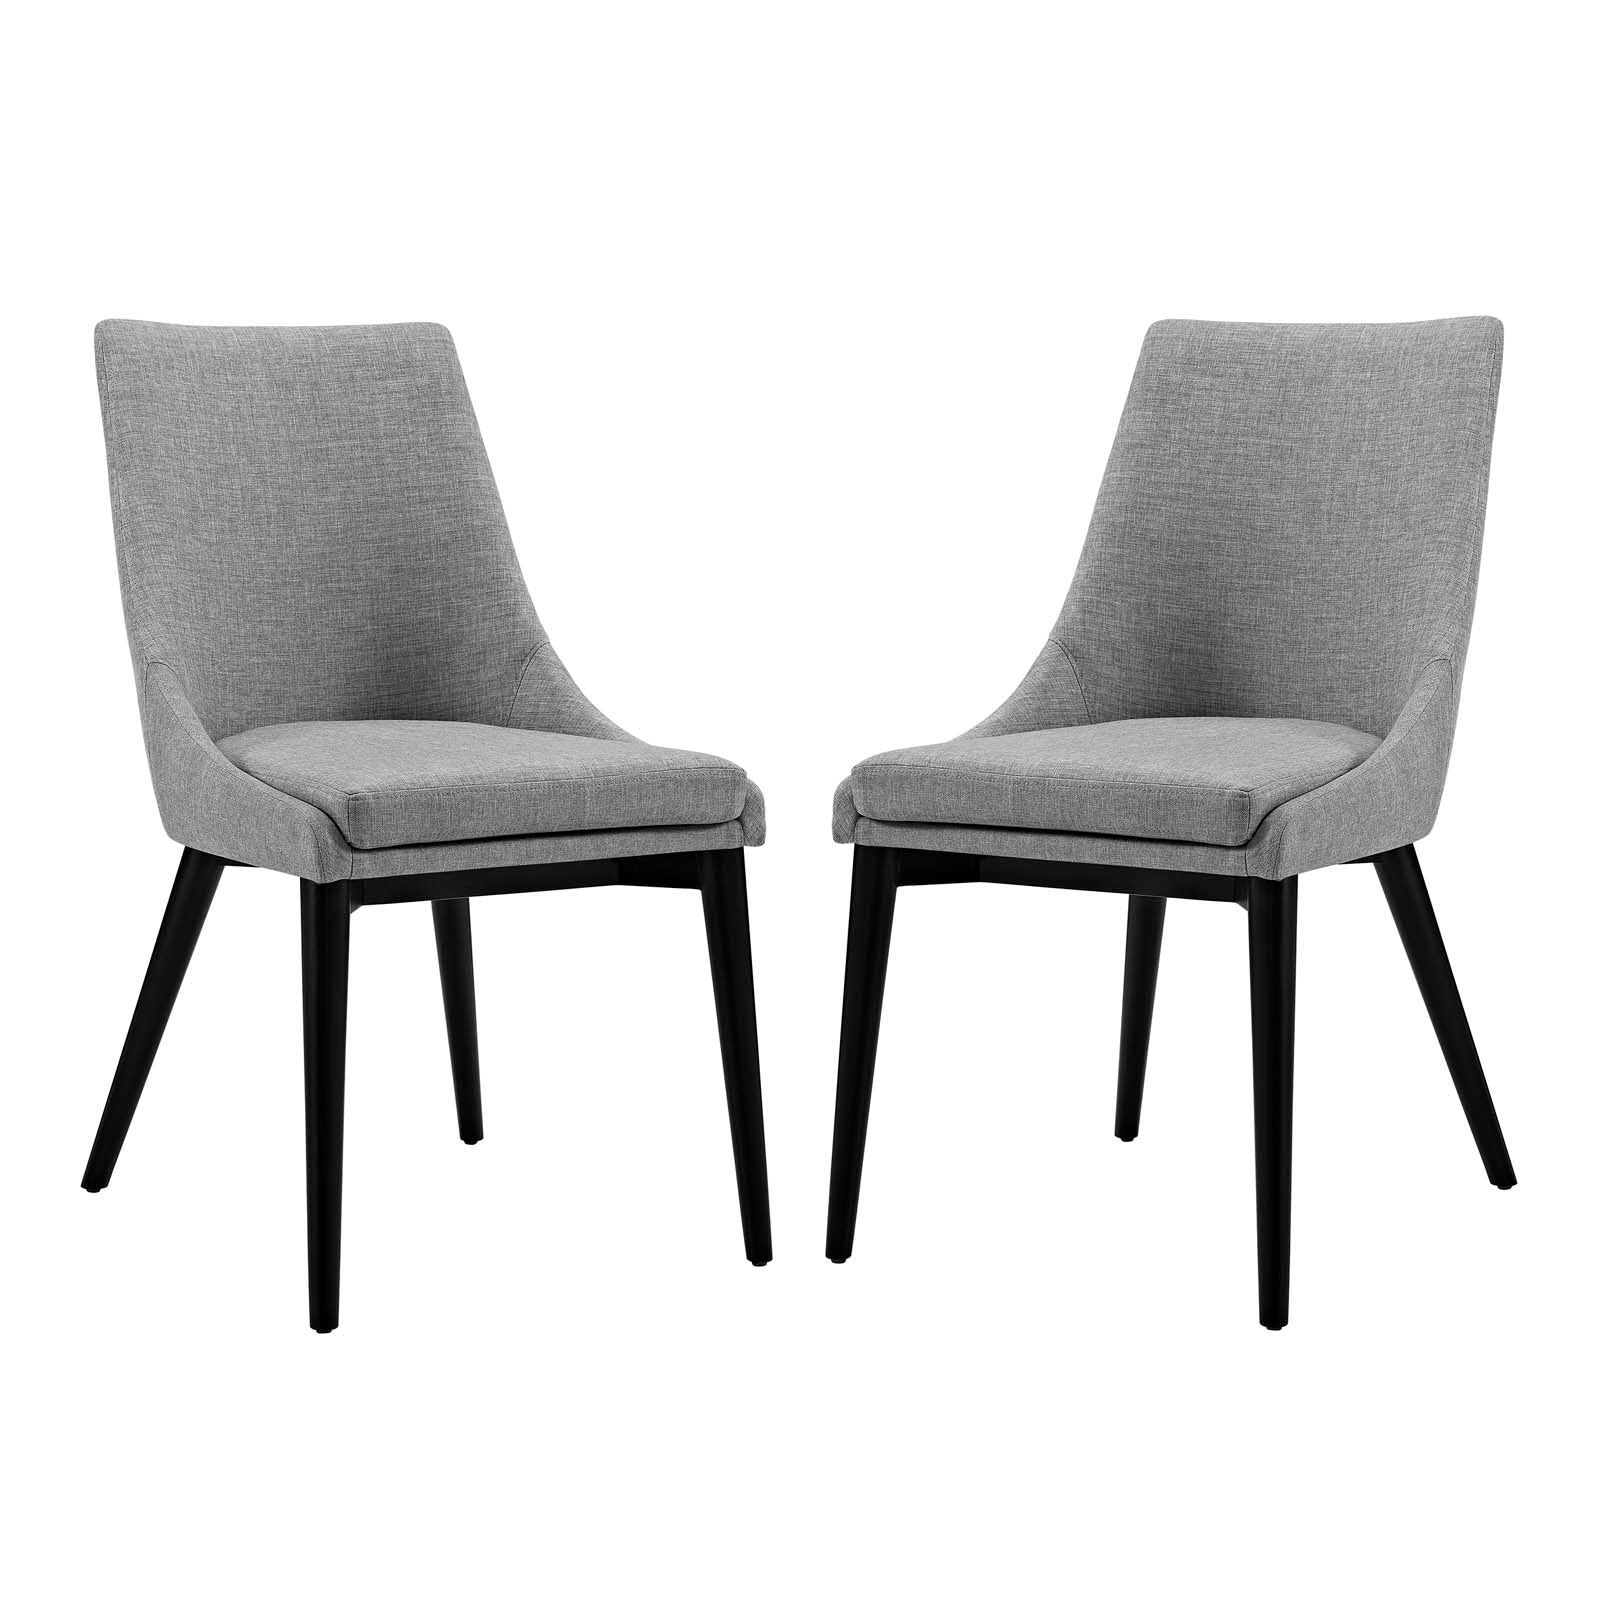 Viscount Dining Side Chair Fabric Set of 2